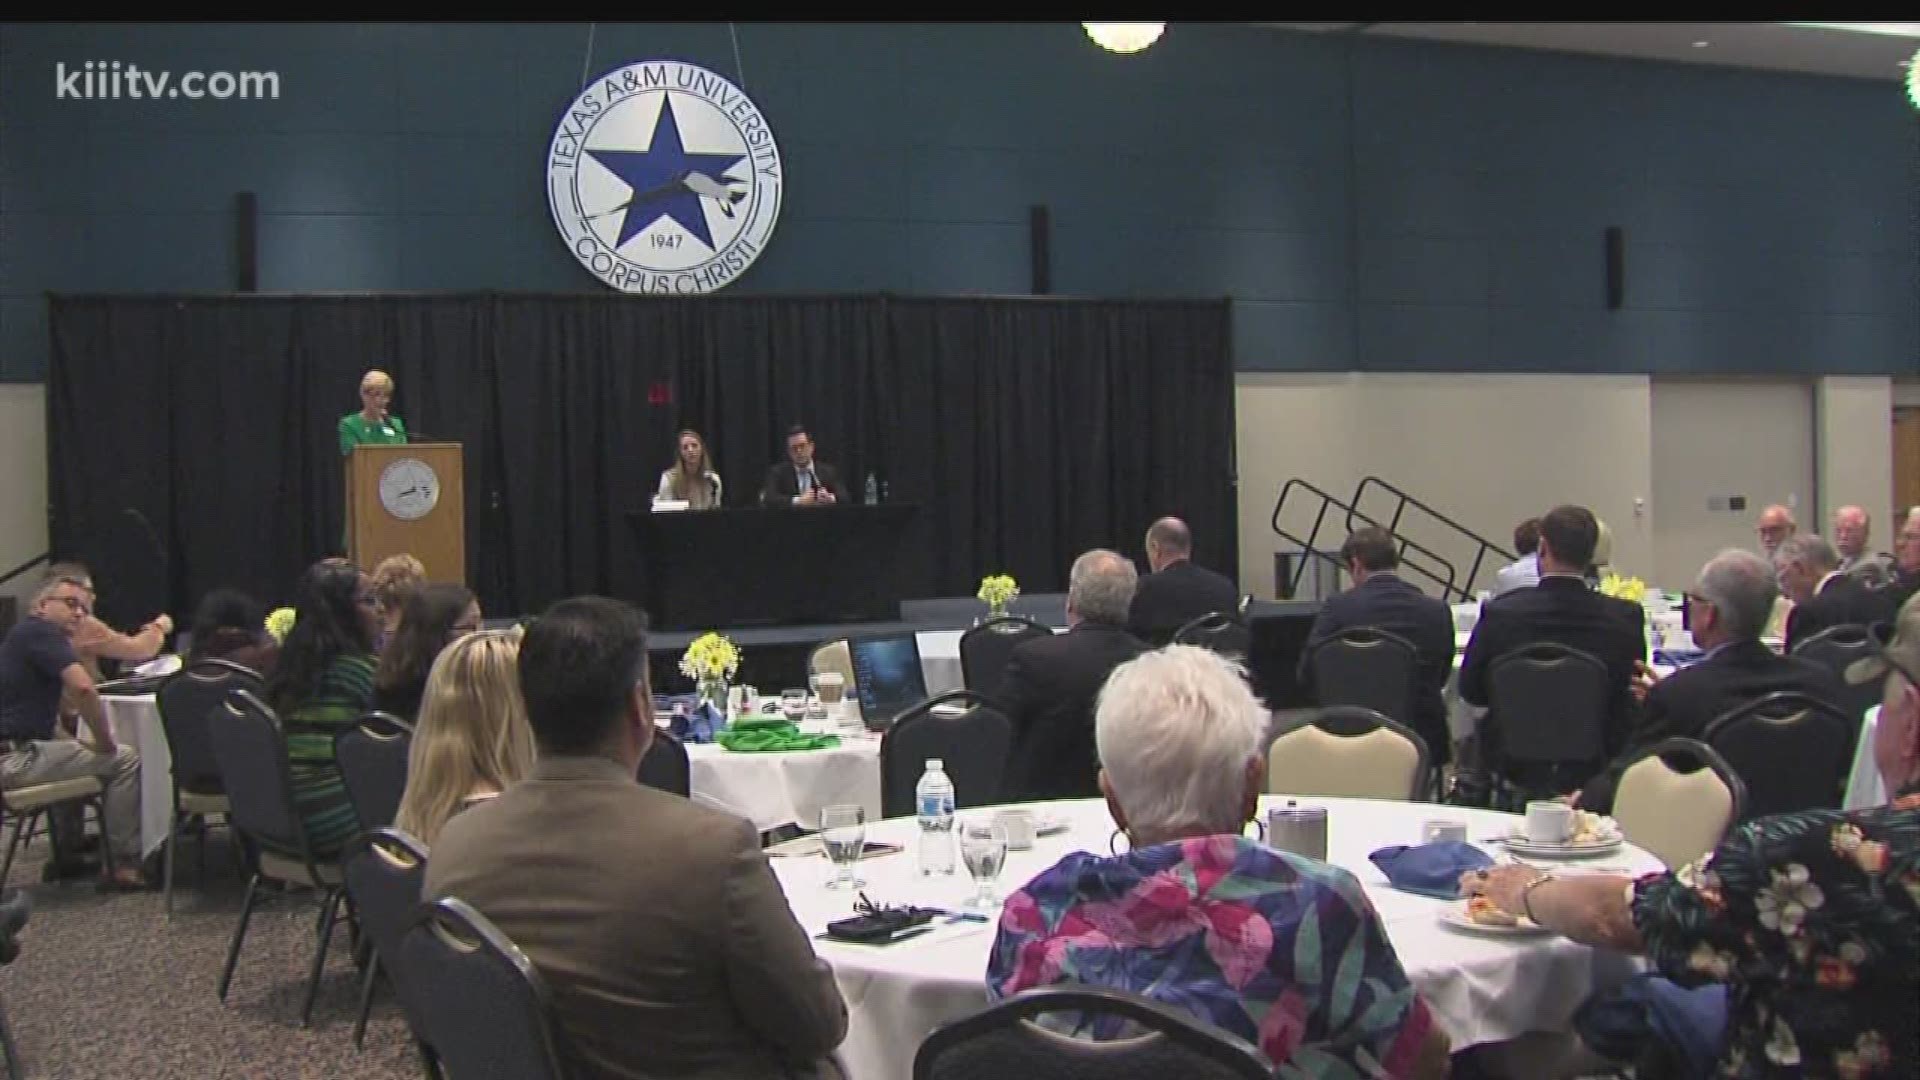 About 100 community leaders, students and Coastal Bend residents gathered Thursday at Texas A&M University-Corpus Christi to hear State Rep. Todd Hunter talk about his newest priority in state government -- transparency.